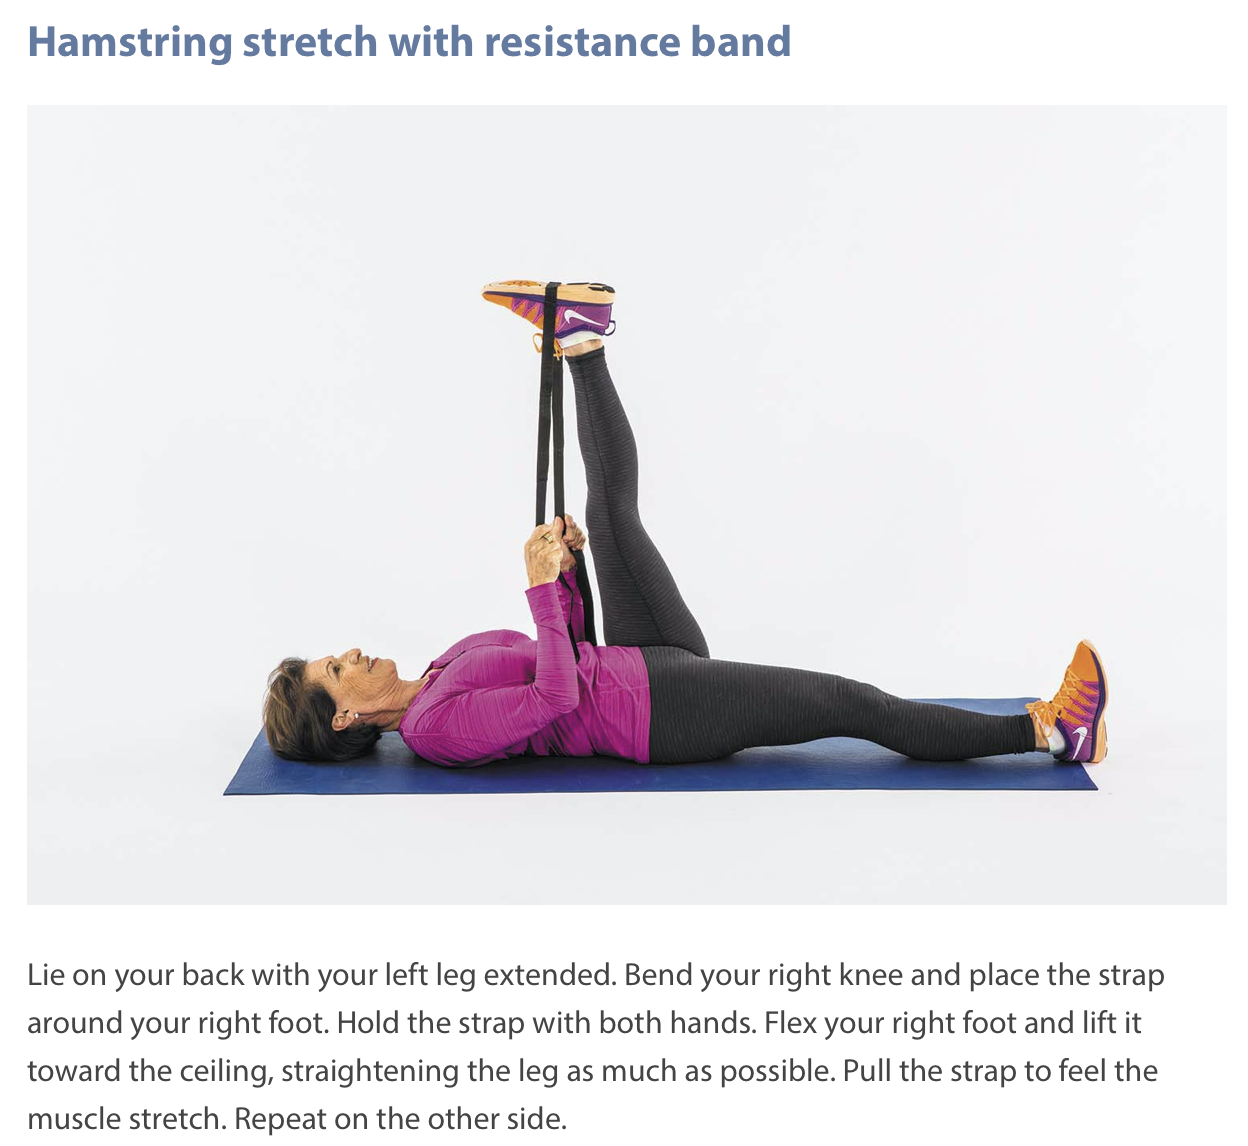 Try These Stretches Before Getting Out Of Bed - Mississauga and ...